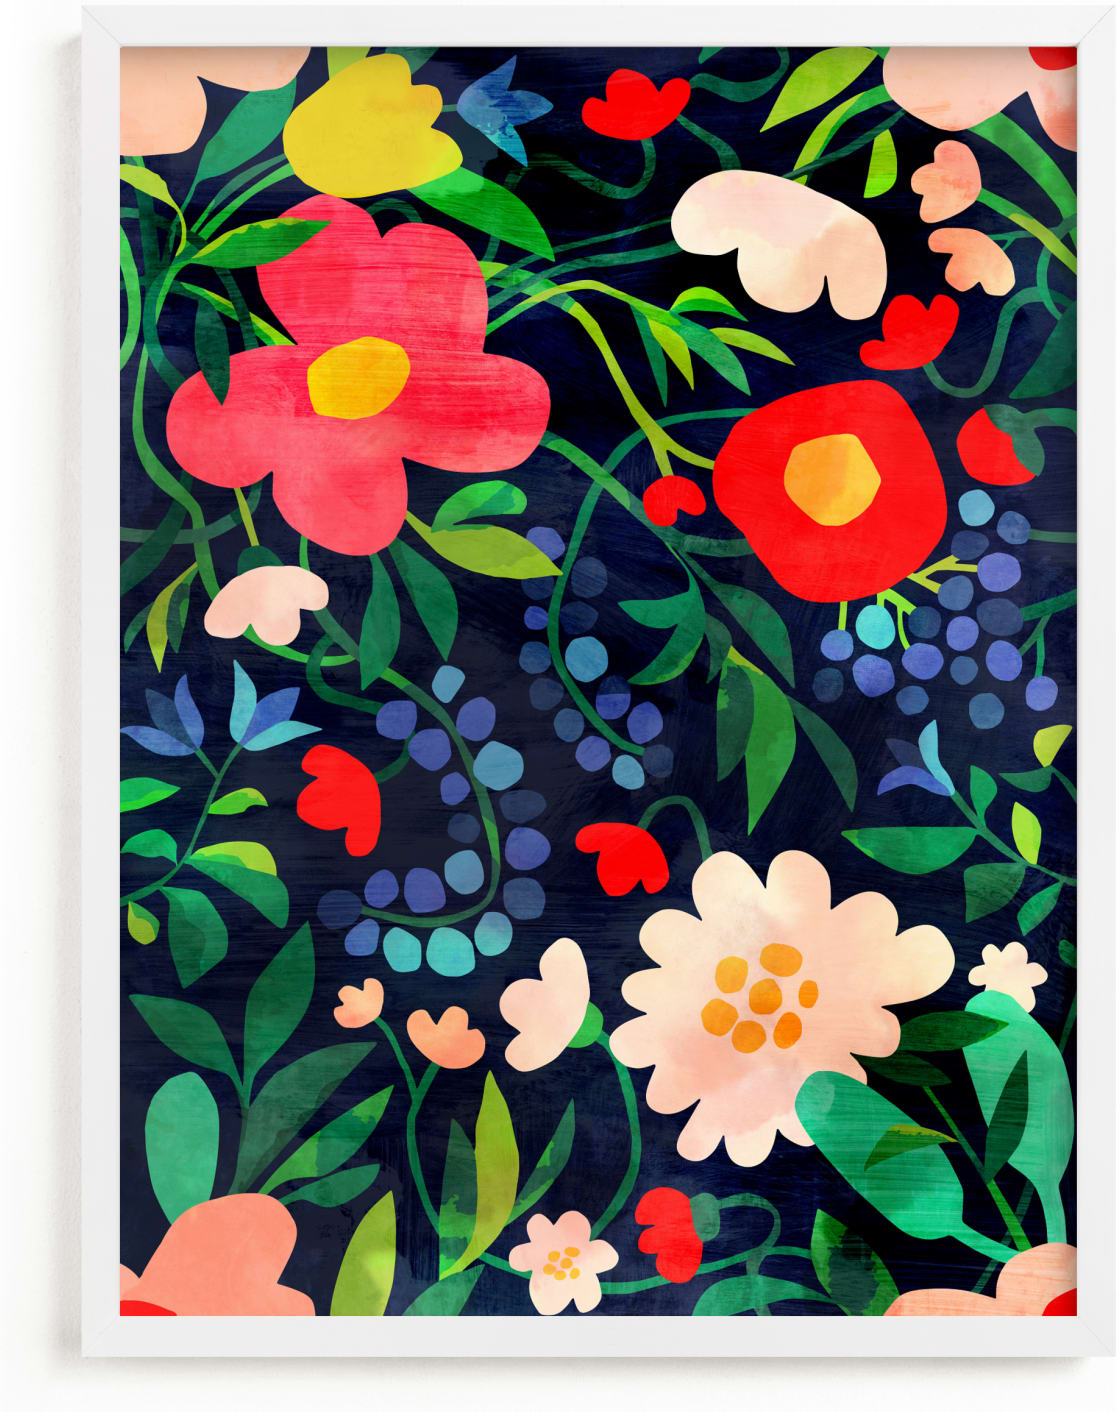 This is a colorful art by Mojca Dolinar called Summer Flowers.